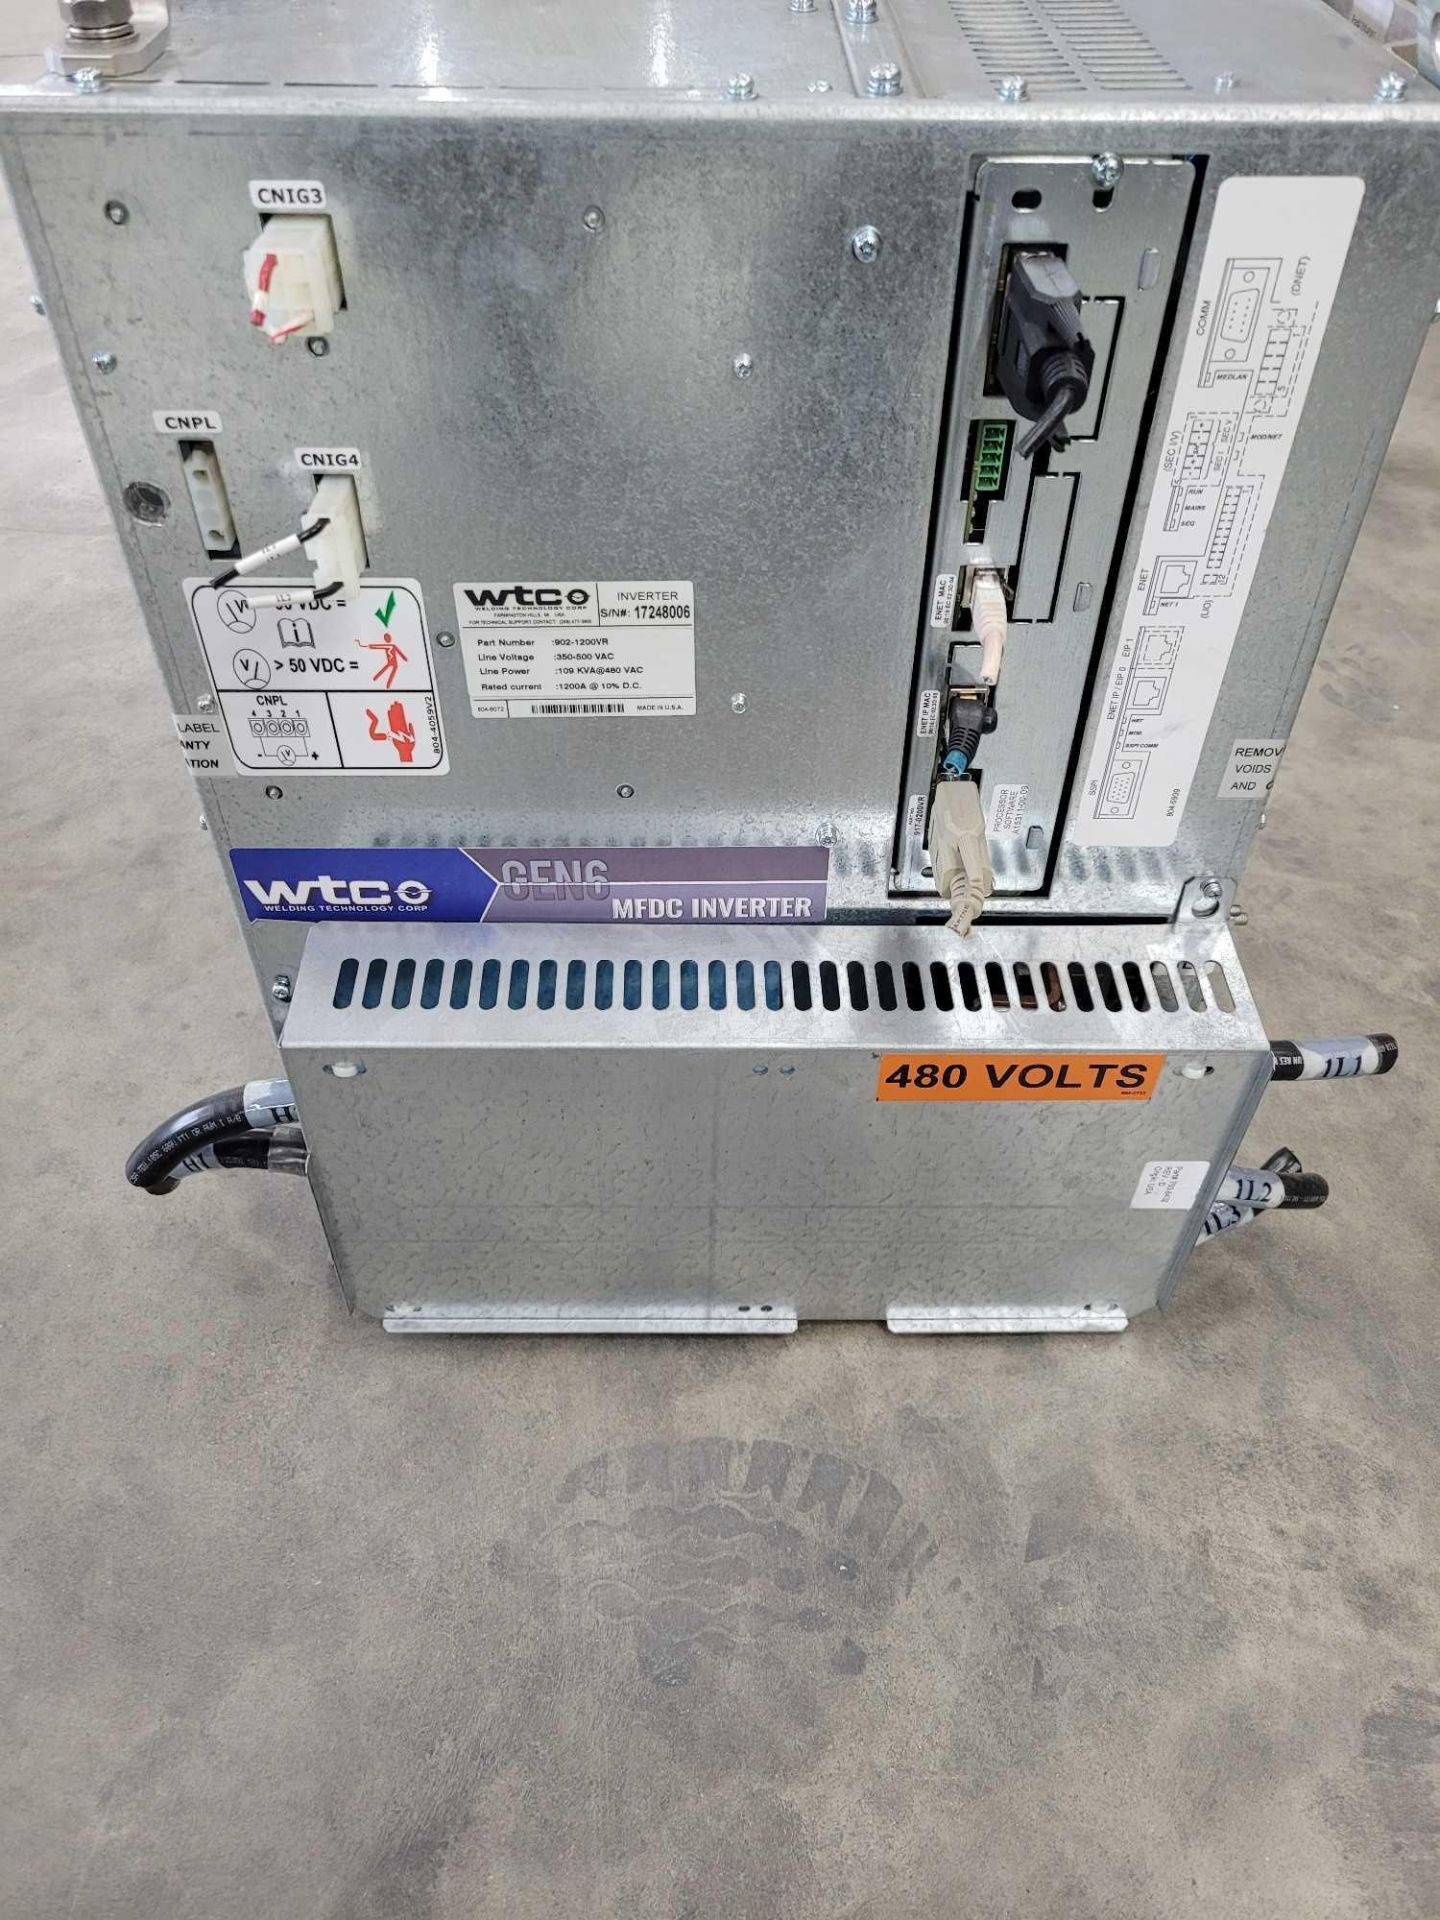 WTC 902-1200VR / Gen 6 MFDC Inverter  /  Lot Weight: 105 lbs - Image 6 of 7